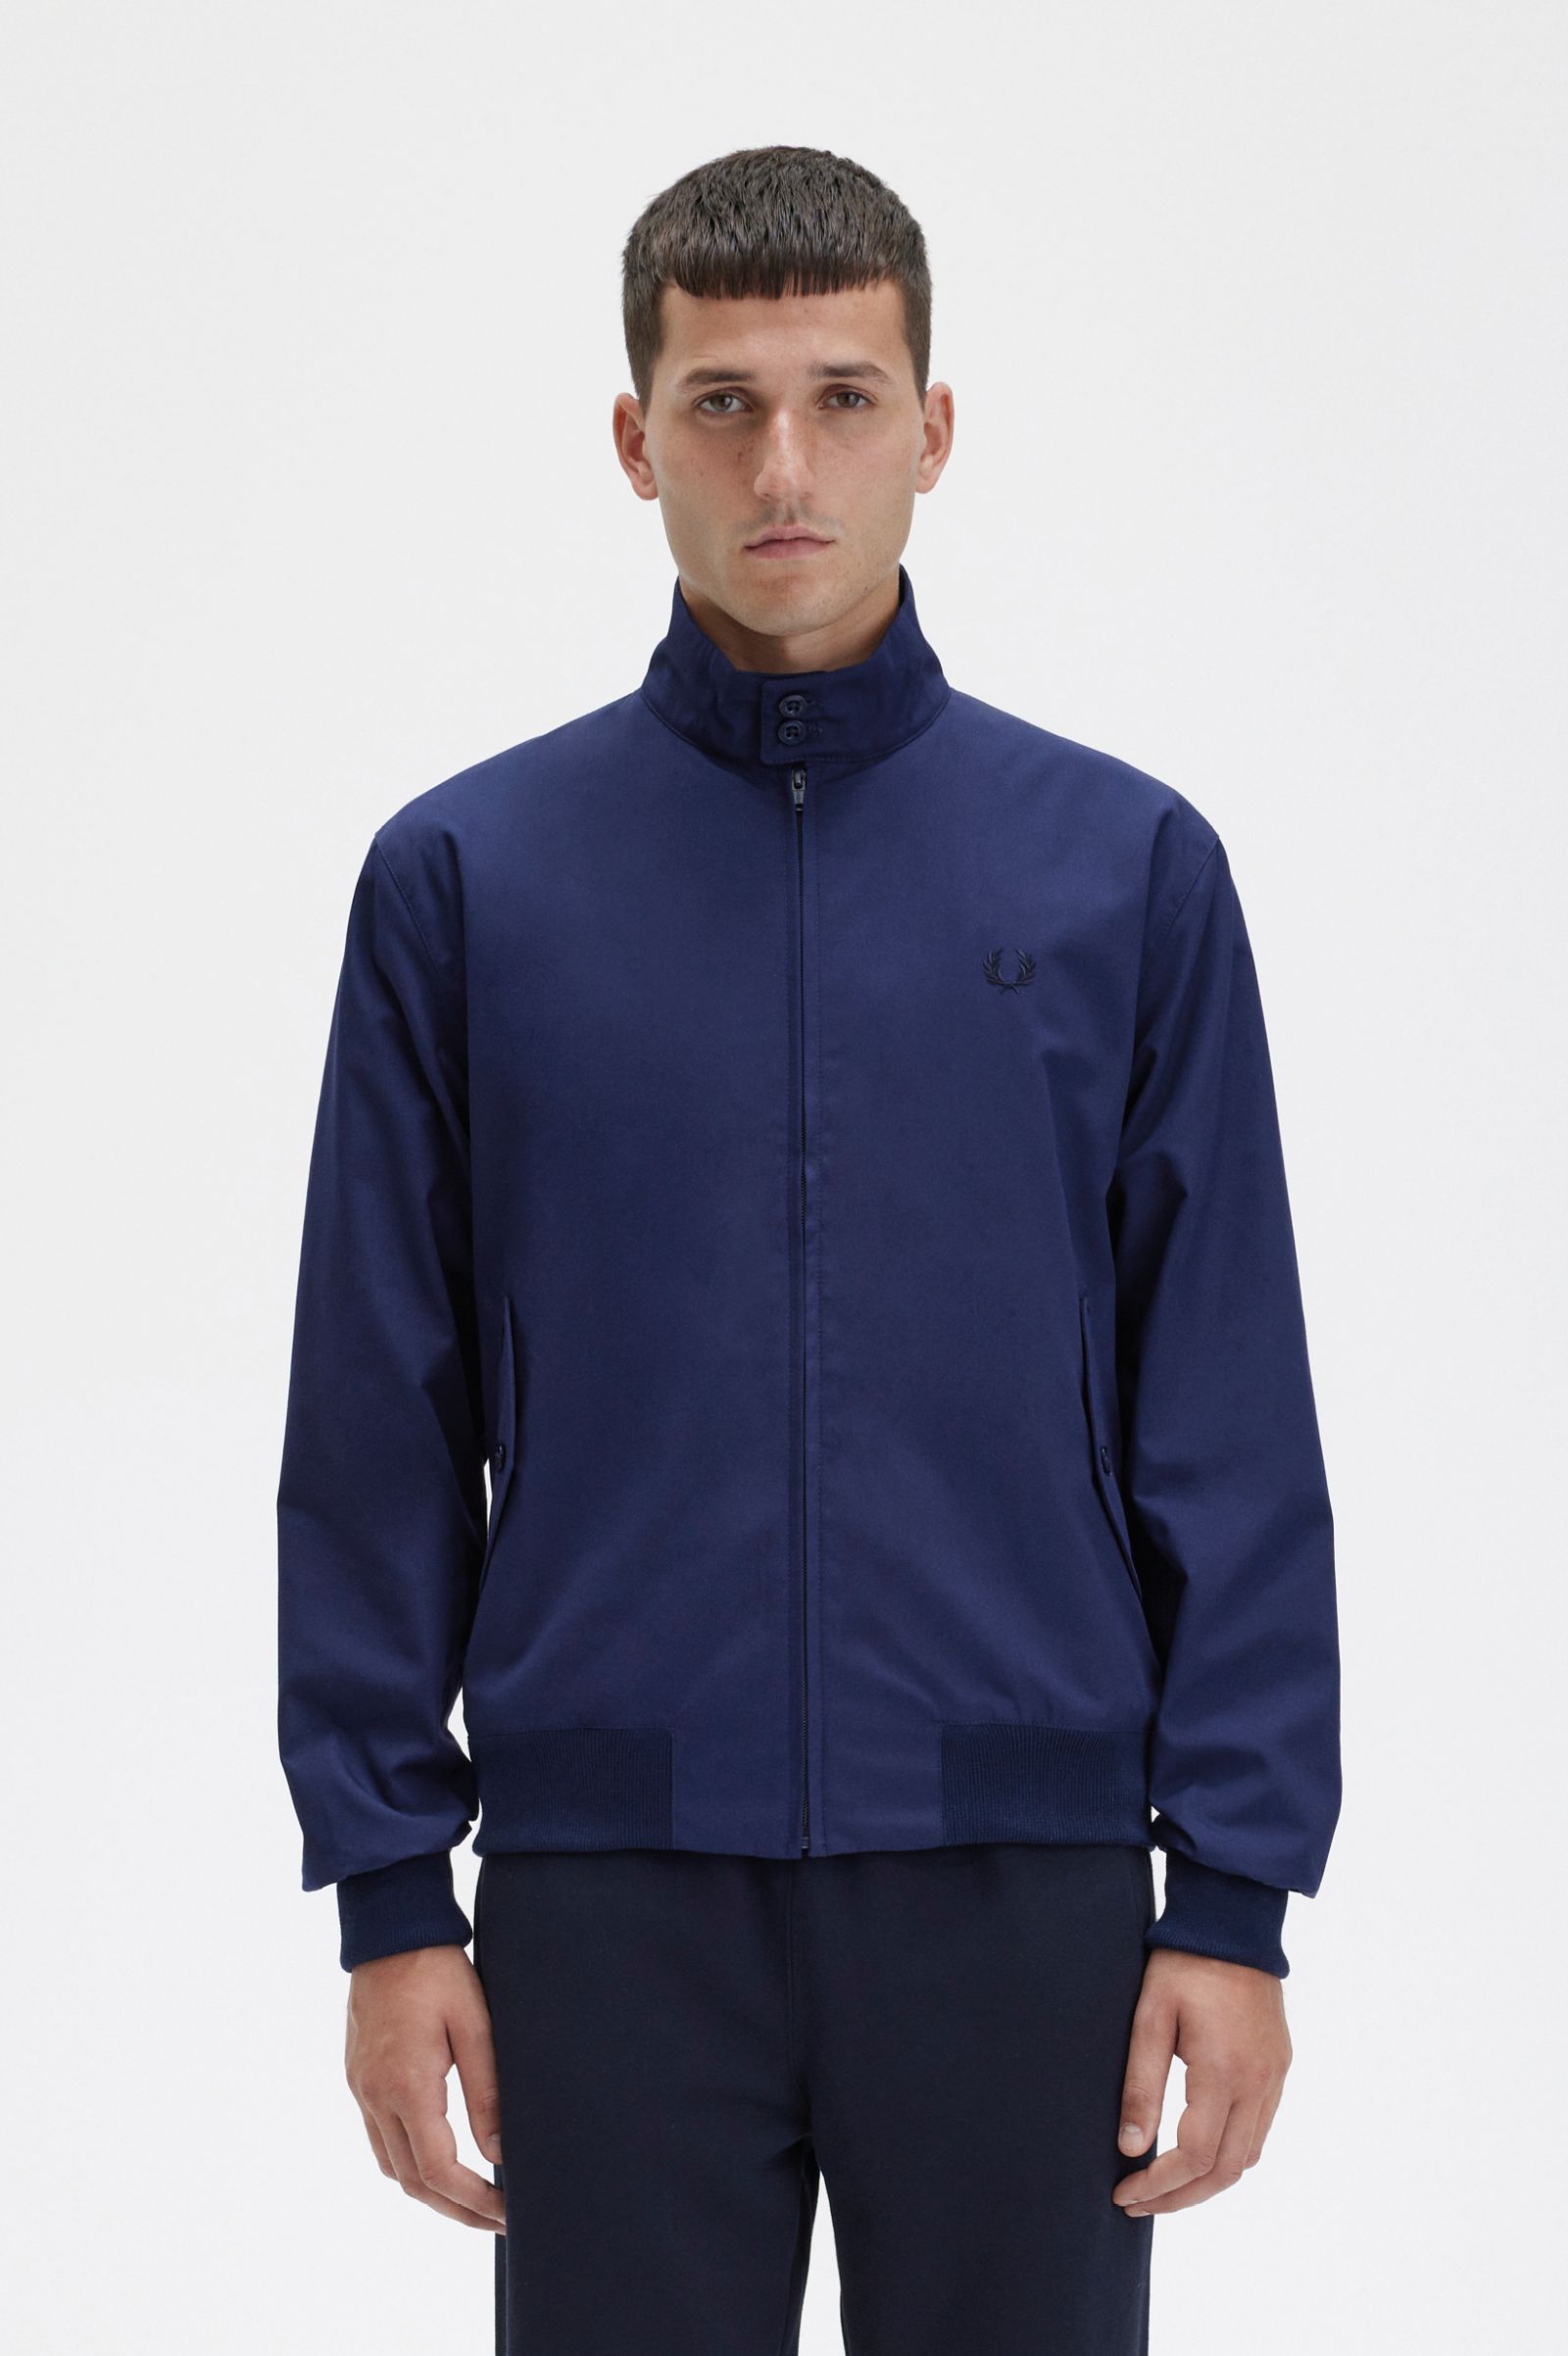 Treble vermomming Maak los Harrington Jacket - Navy | Made In England | Men's Jackets, Shirts &  T-shirts, Made In England Forever | Fred Perry US